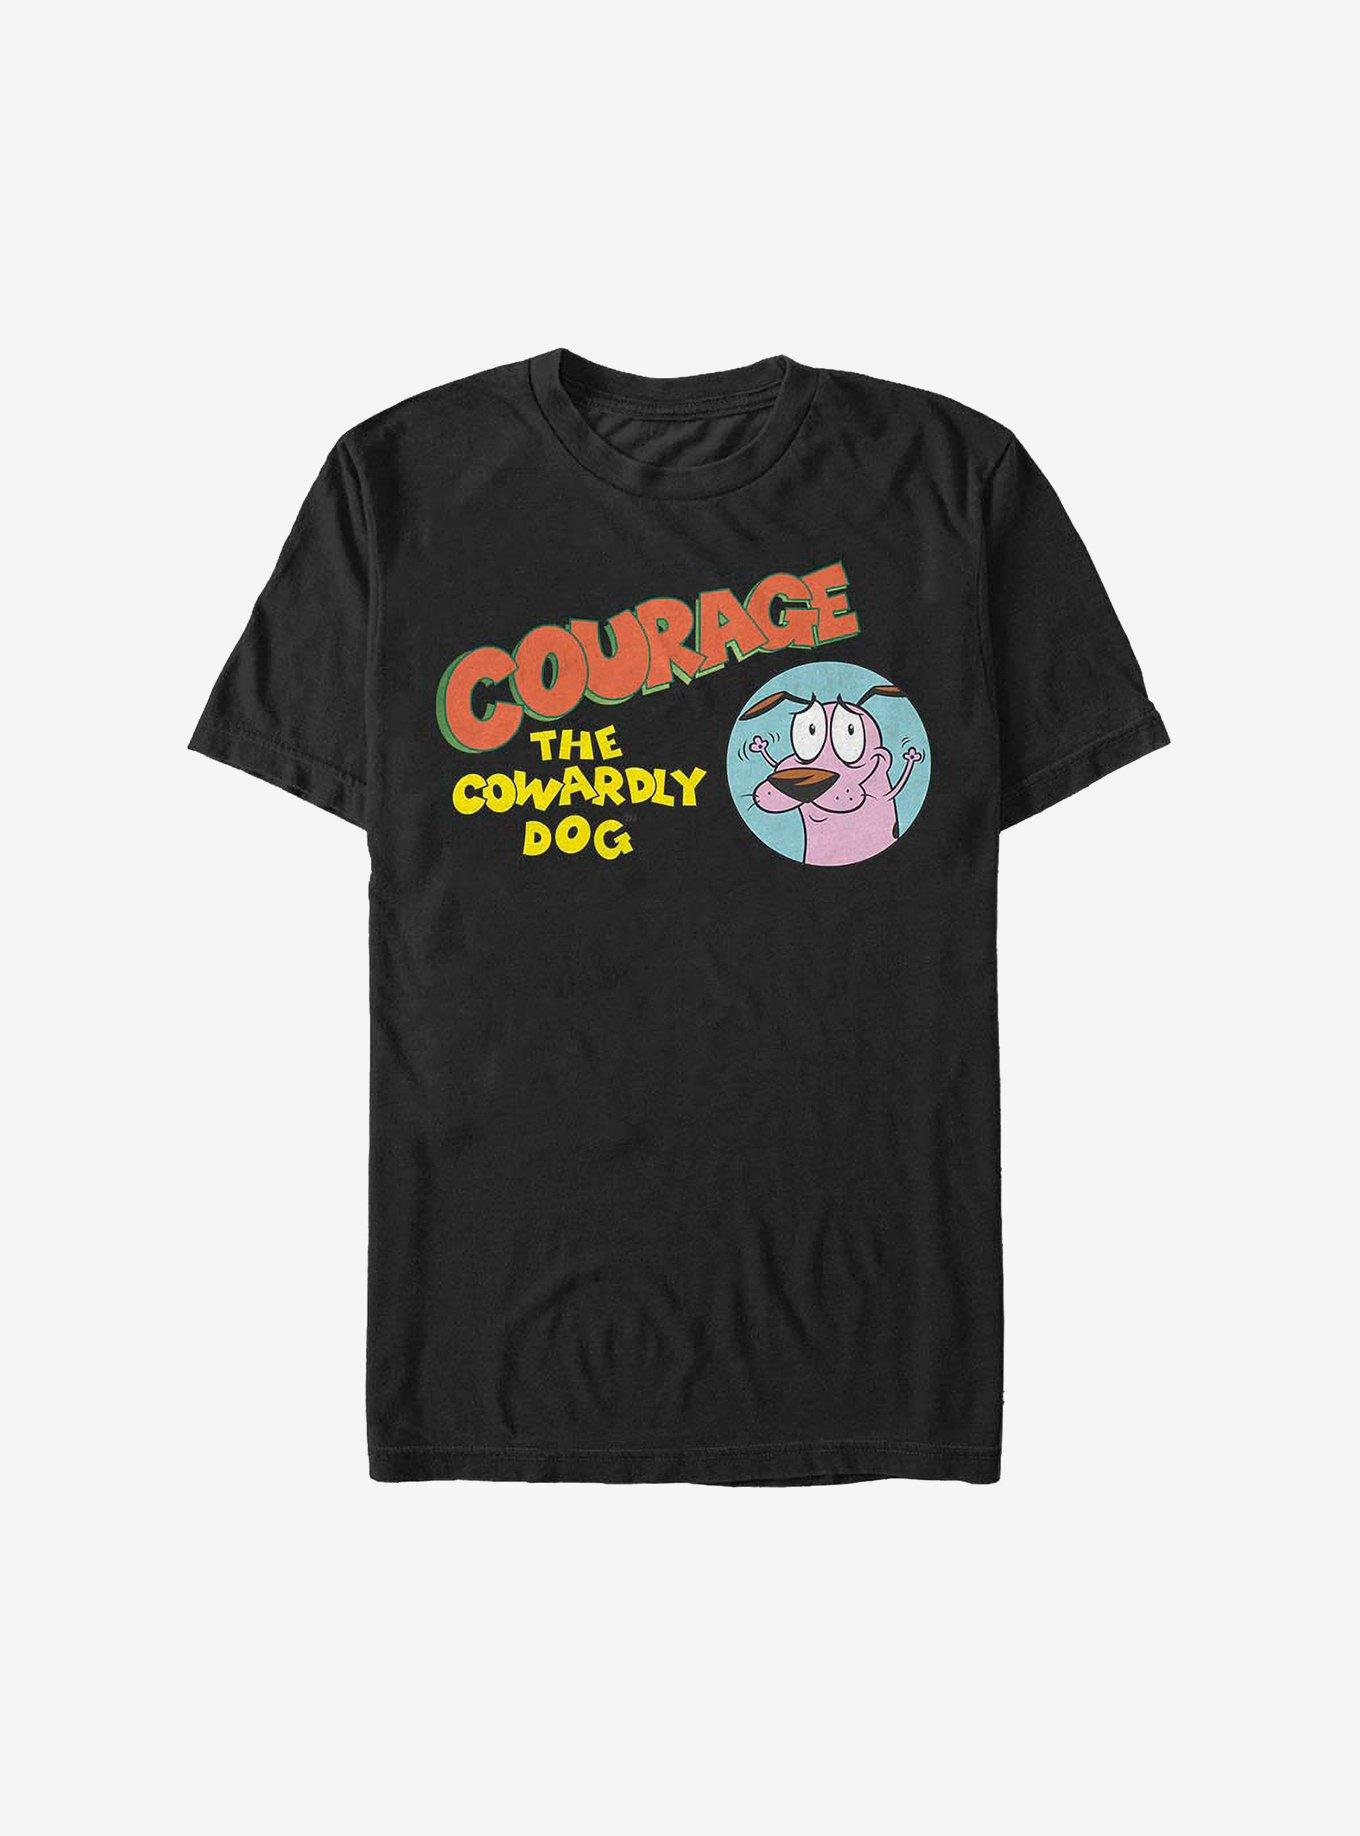 COURAGE THE COWARDLY DOG EVIL INSIDE T Shirts, Hoodies, Sweatshirts & Merch